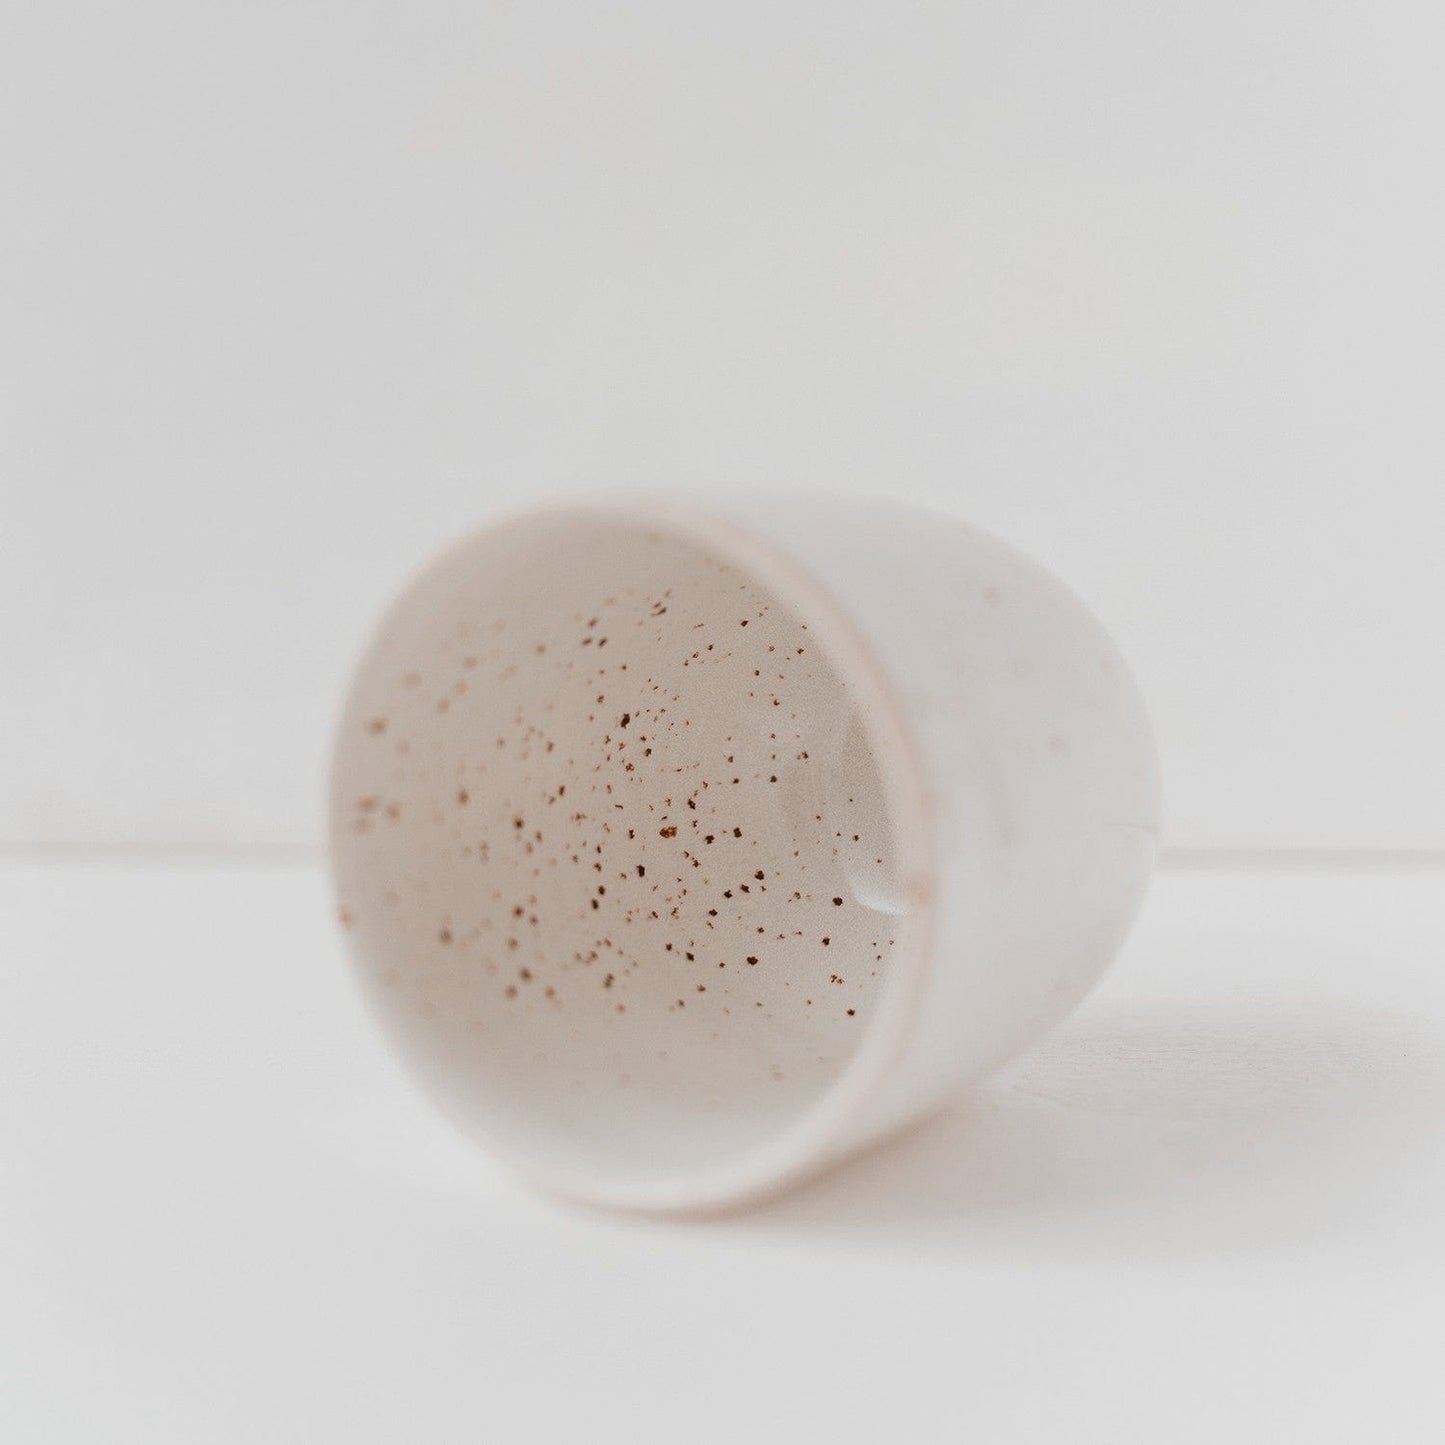 Faerly Candles 'Calm' Candle in Reusable Handmade Stoneware Mug - Egyptian Cotton Fragrance